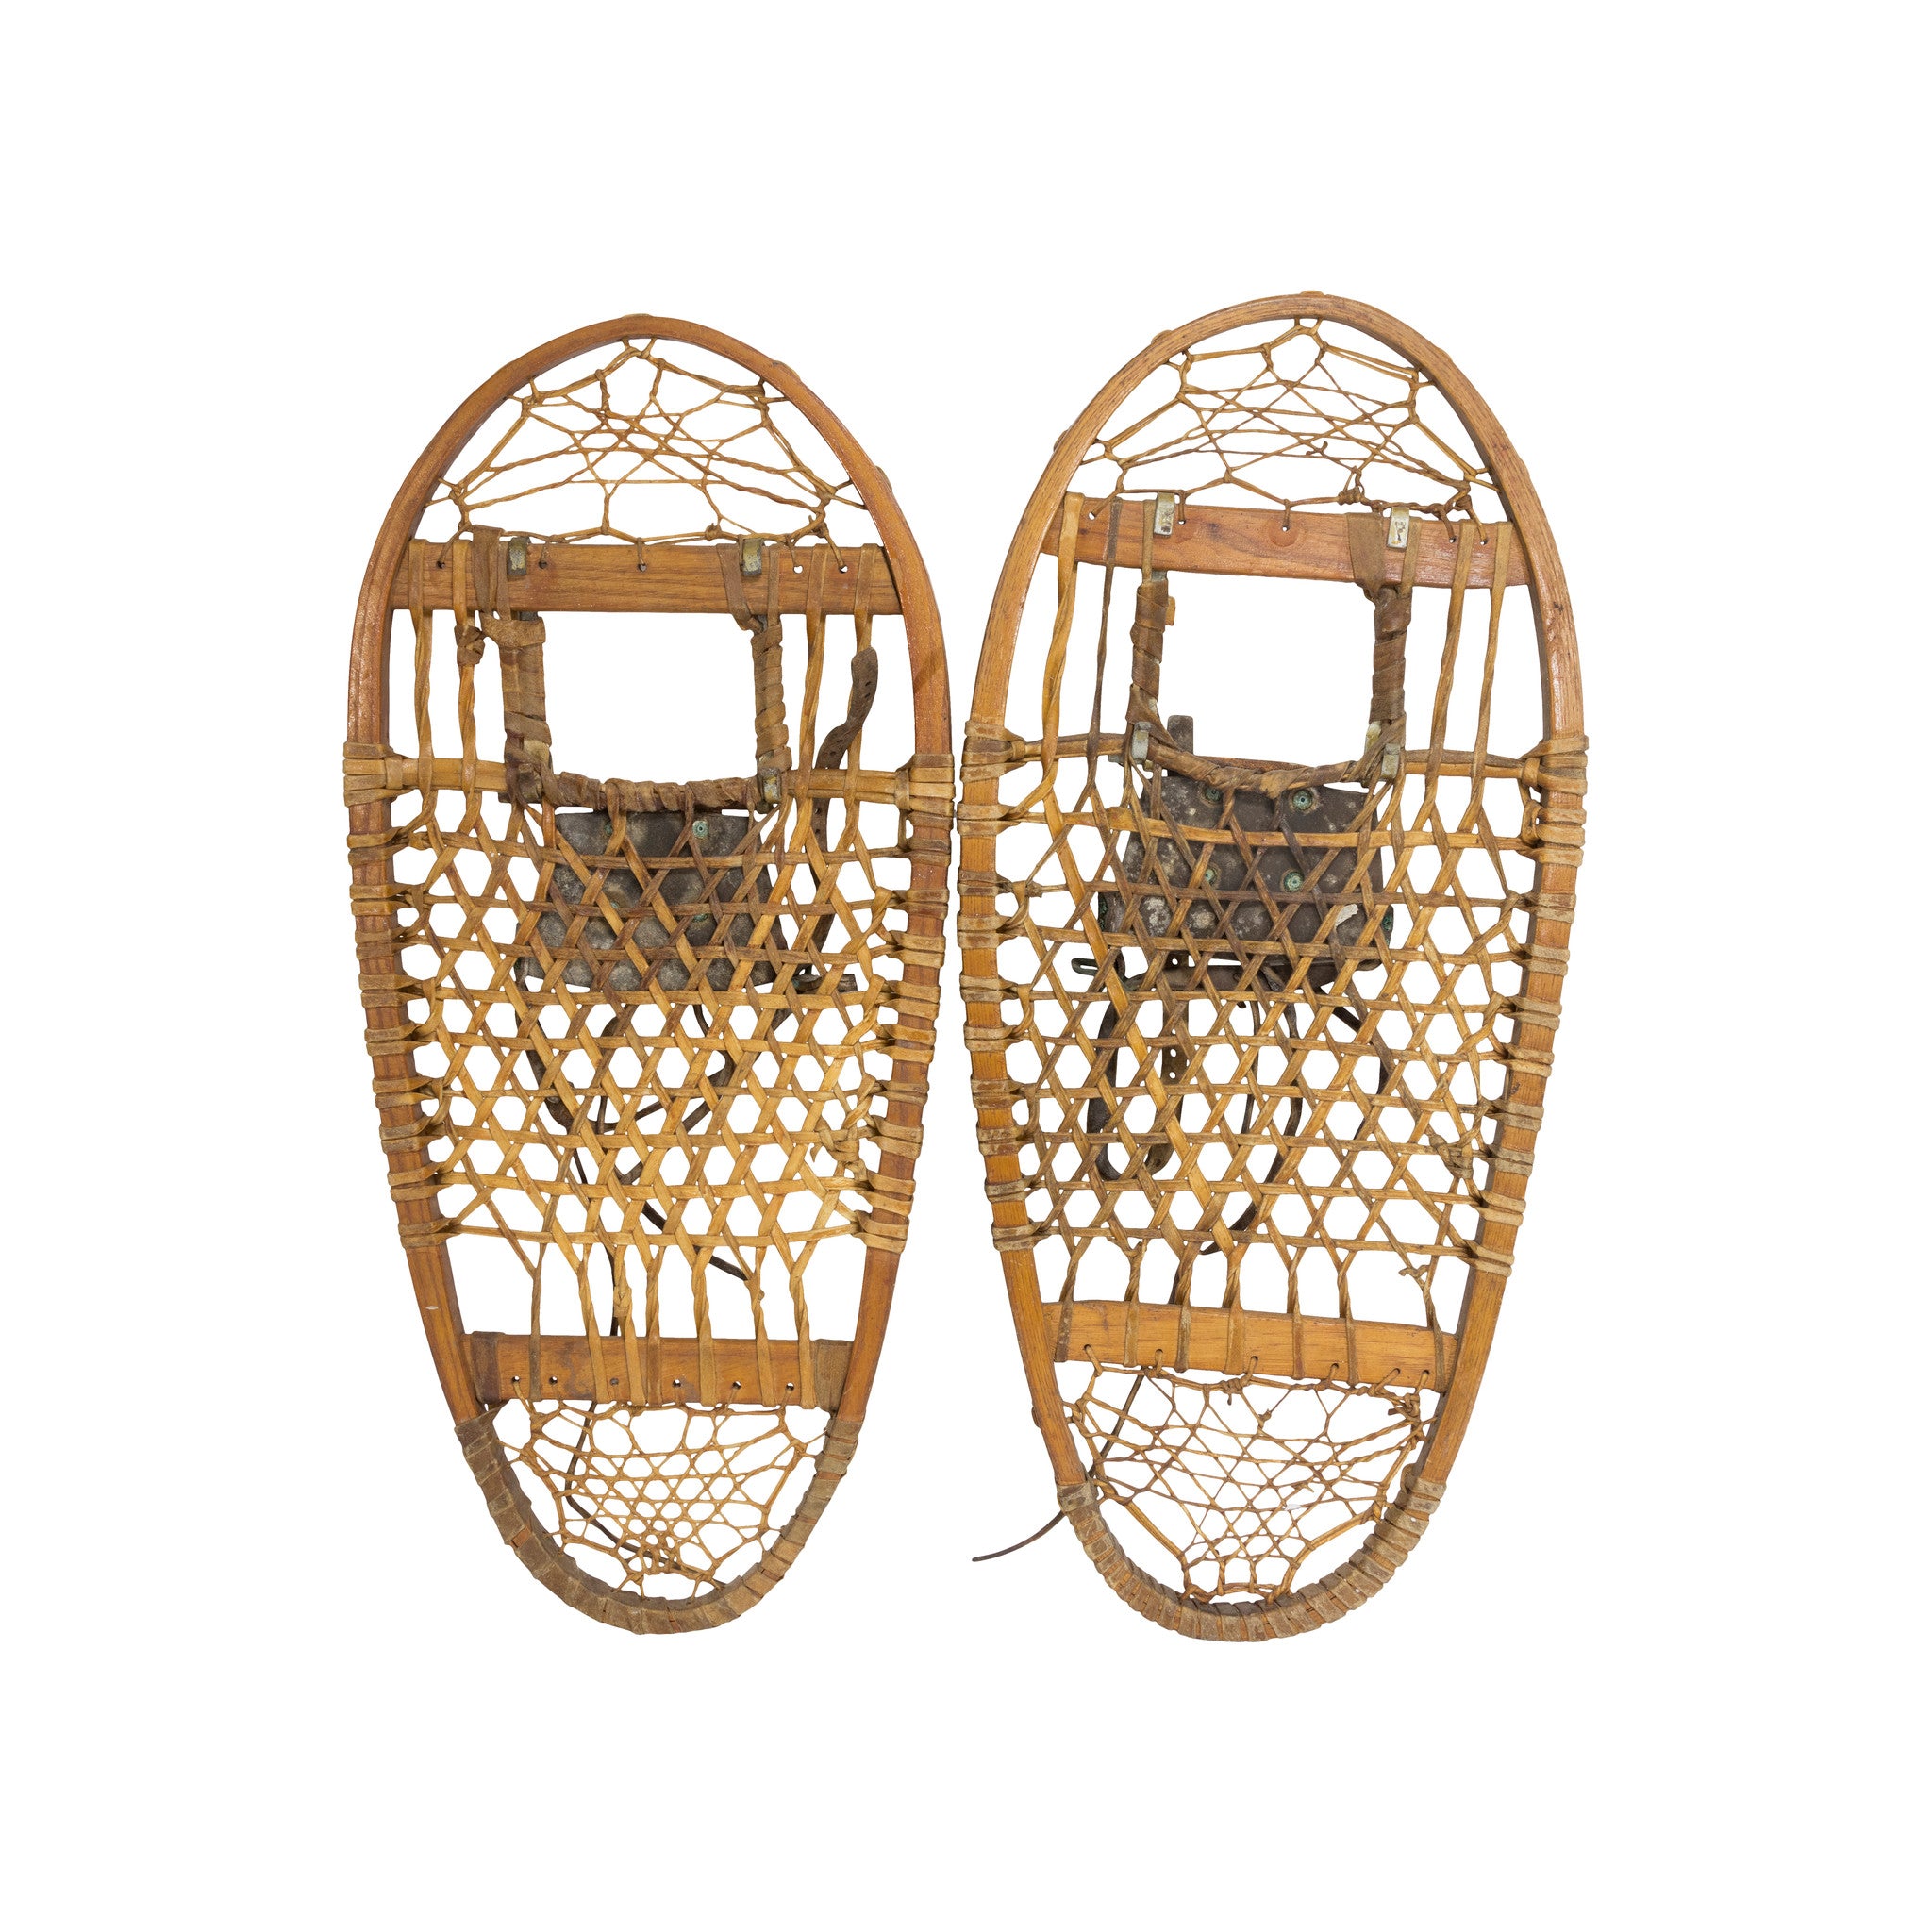 Lund Teardrop Shaped Snowshoes